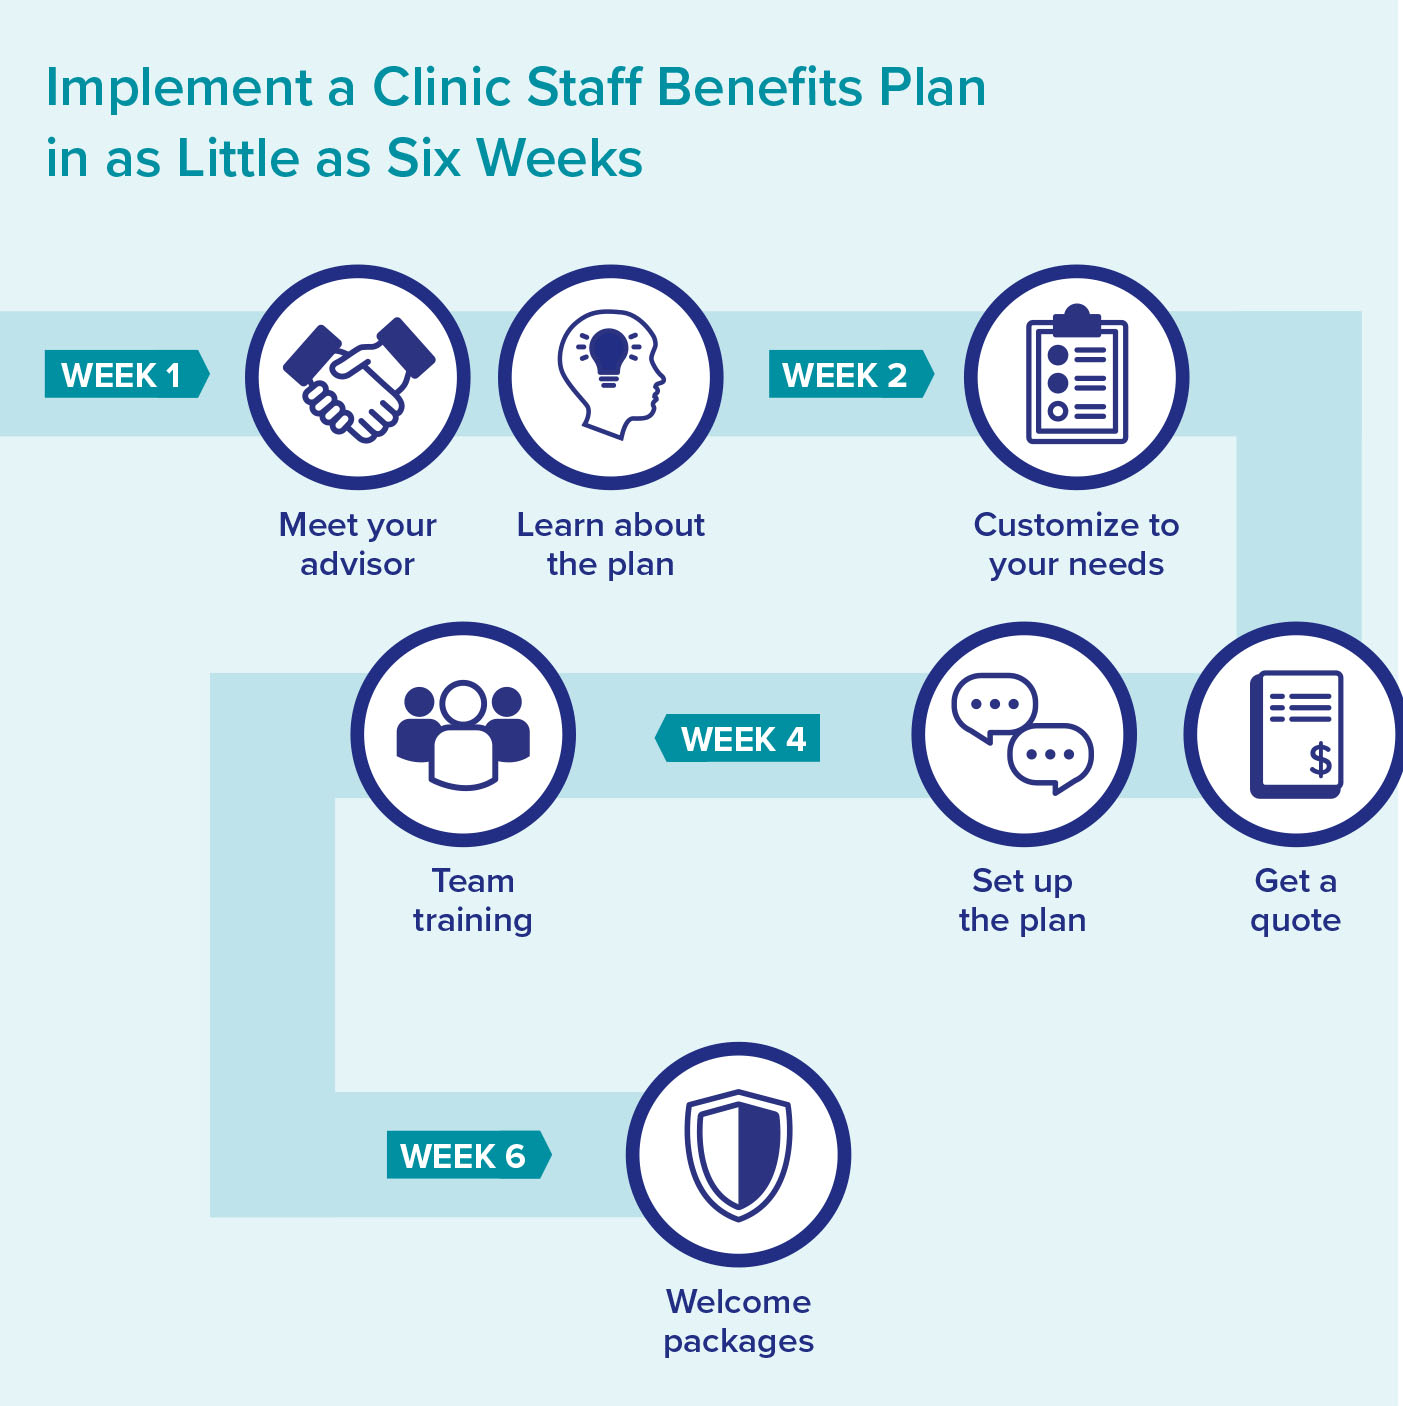 Implement a Clinic Staff Benefits Plan in as little as six weeks